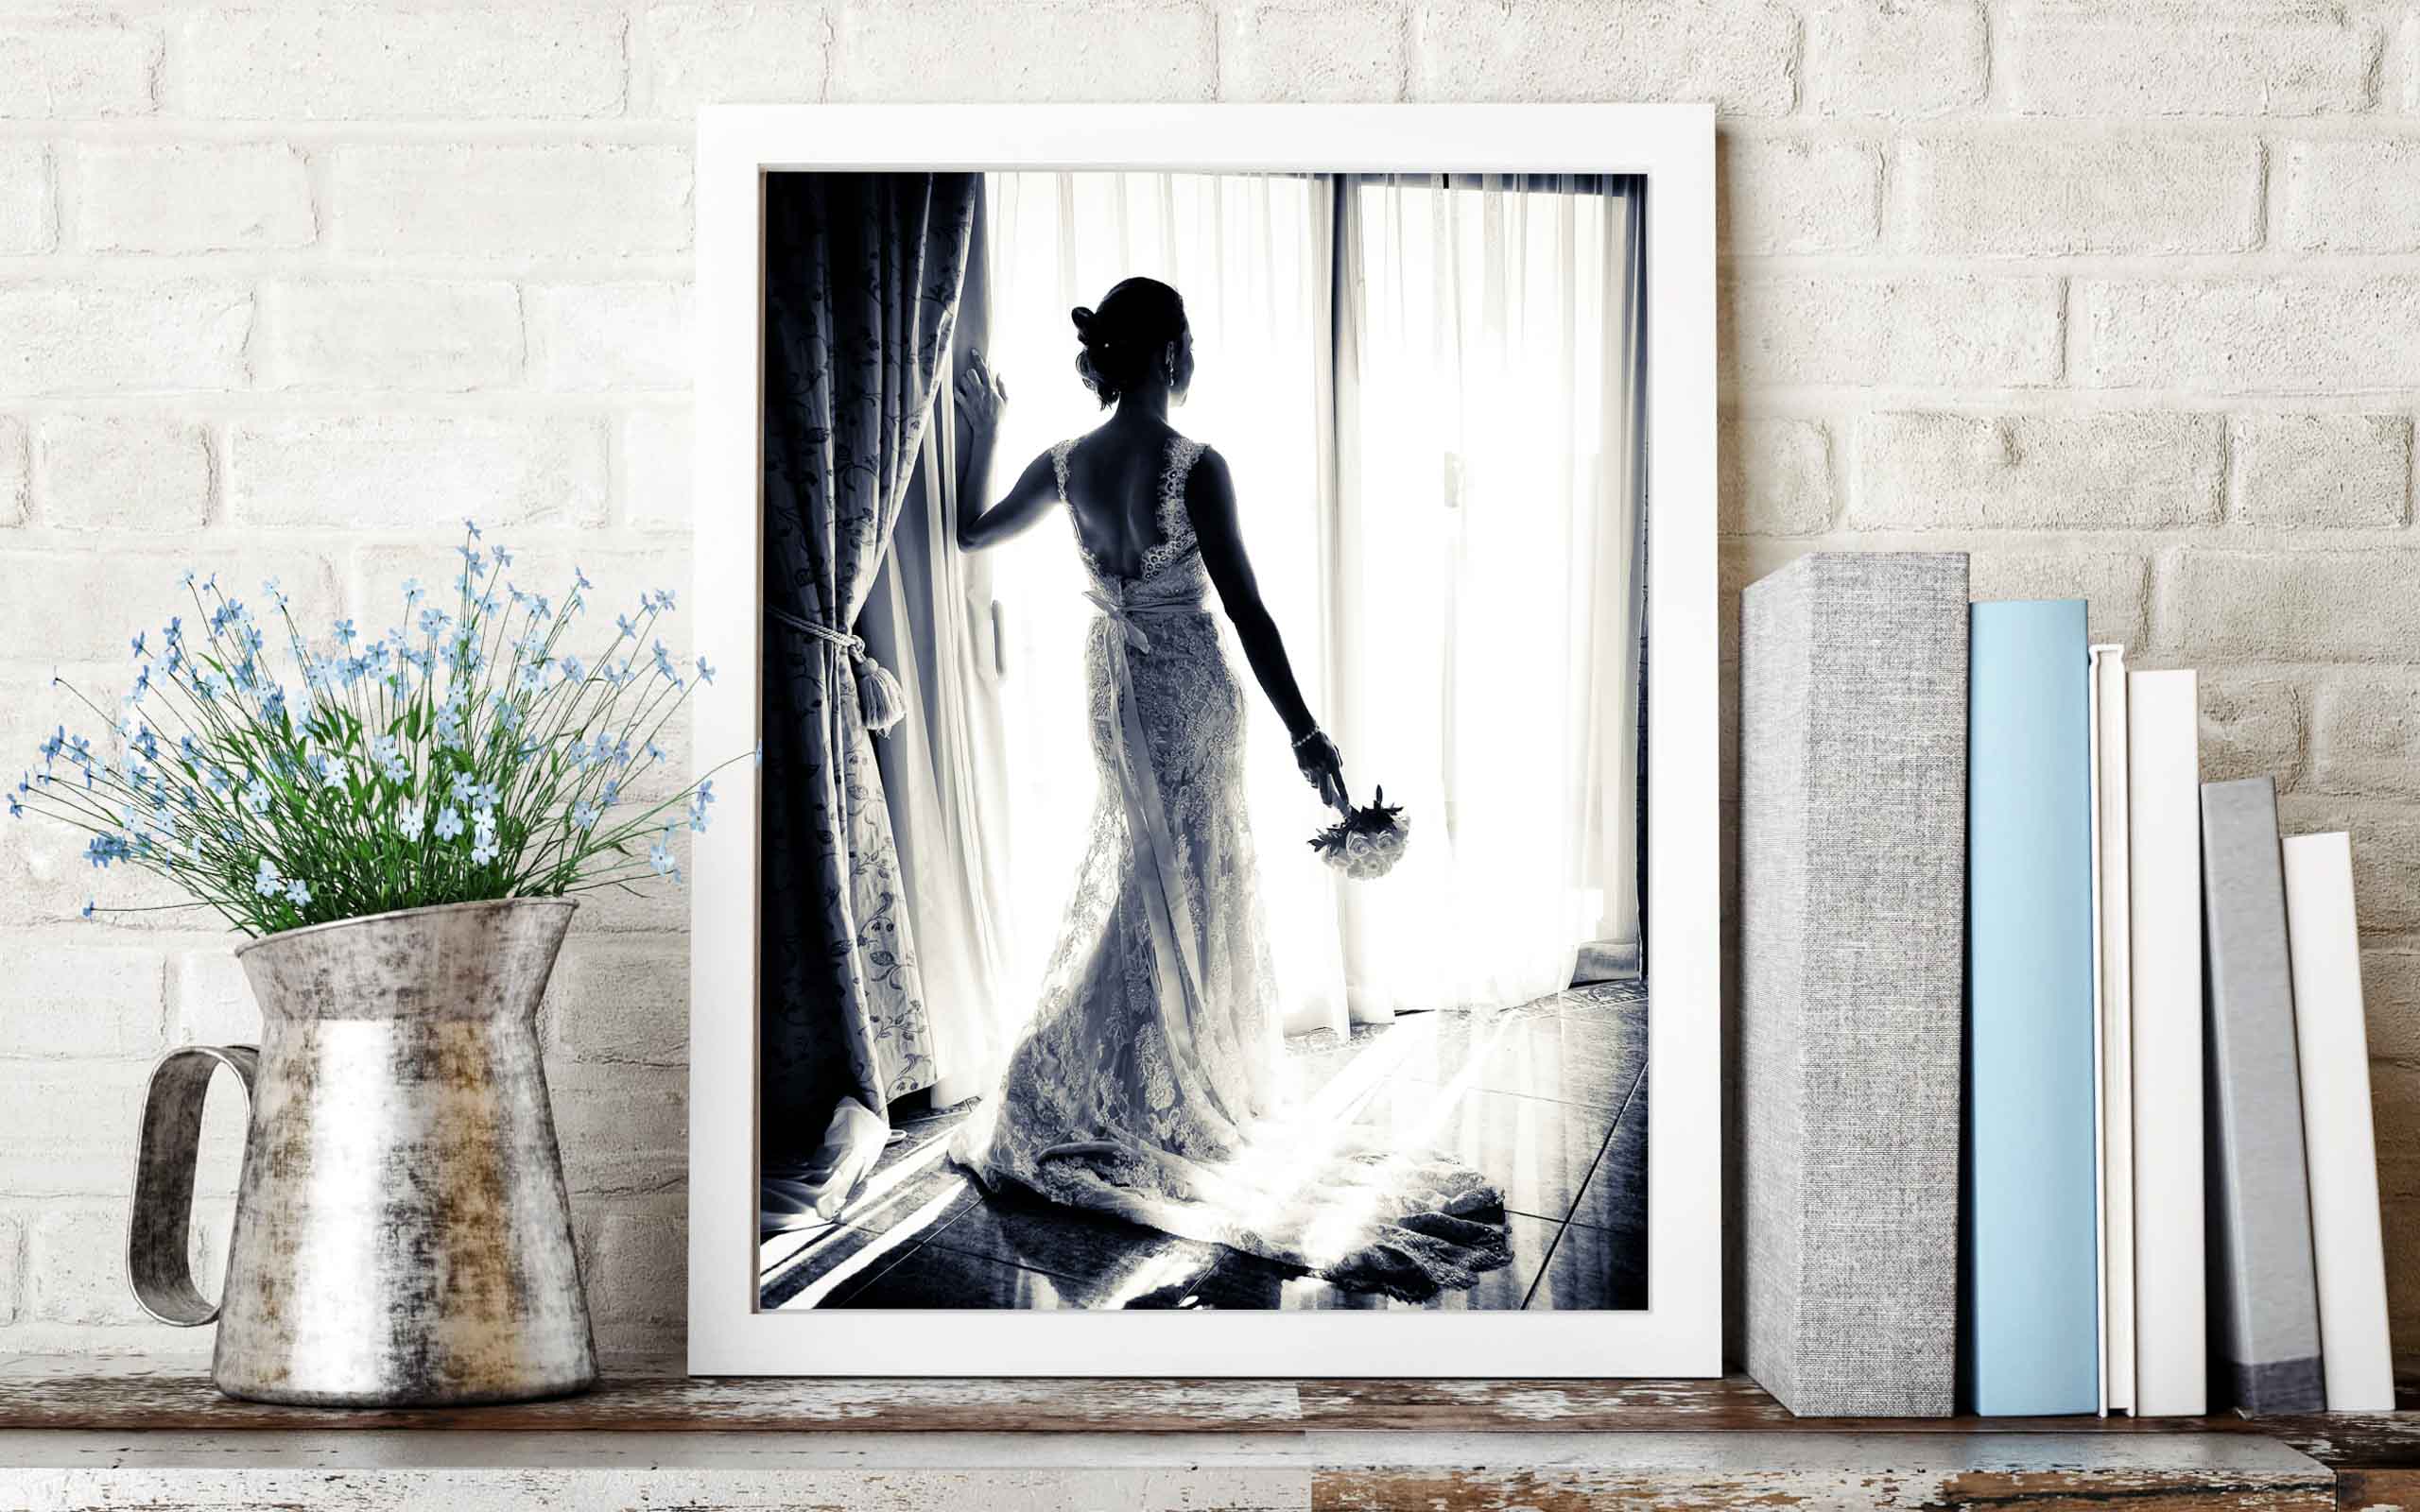 Picture Framing. This is an image of image framing and photo mounting displayed at home as decor